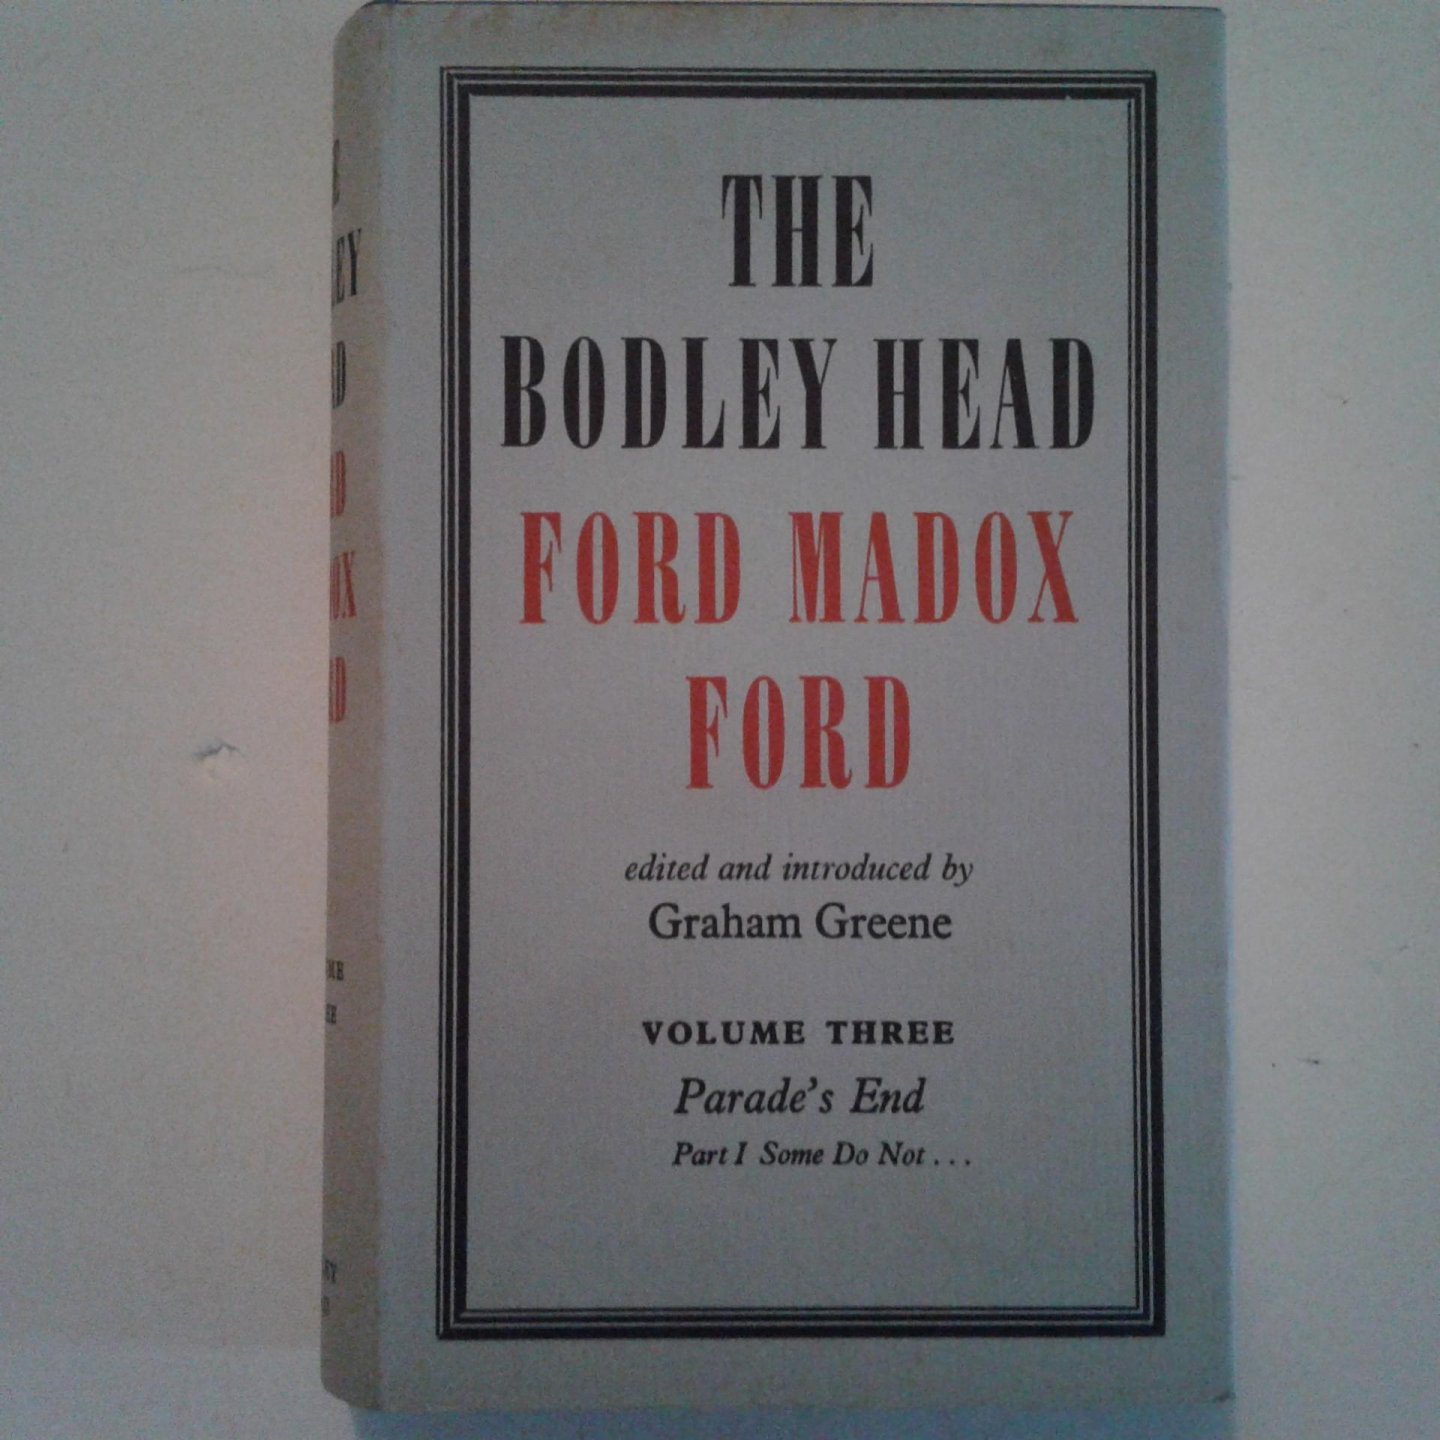 Ford, Ford Madox - The Bodley Head